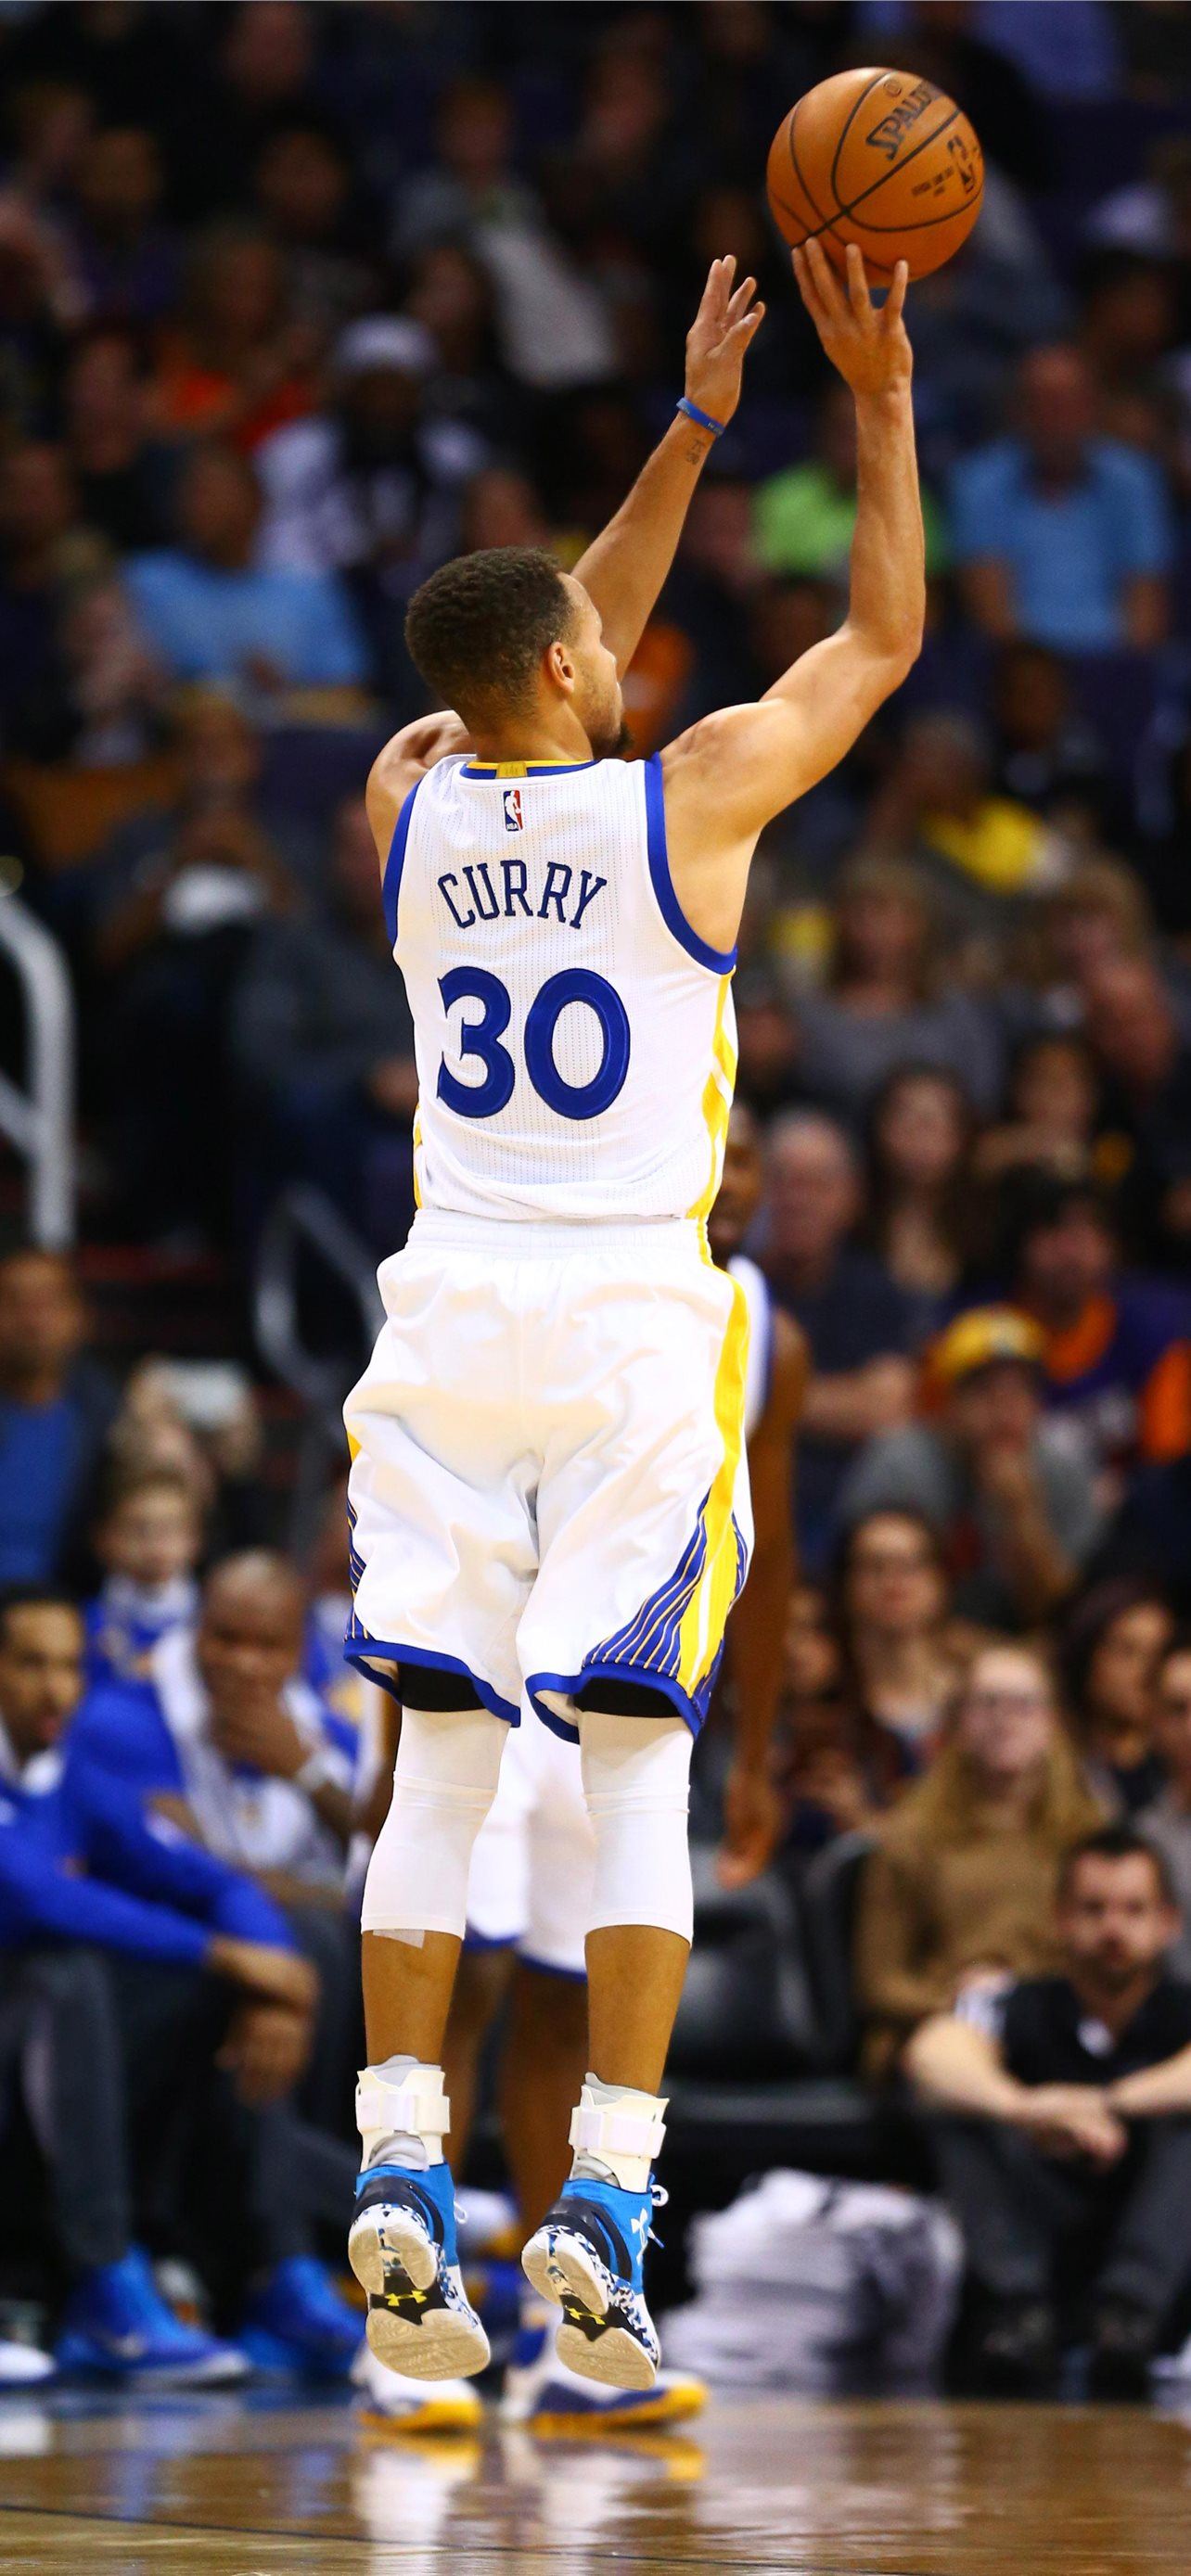 Steph Curry Shooting Wallpaper